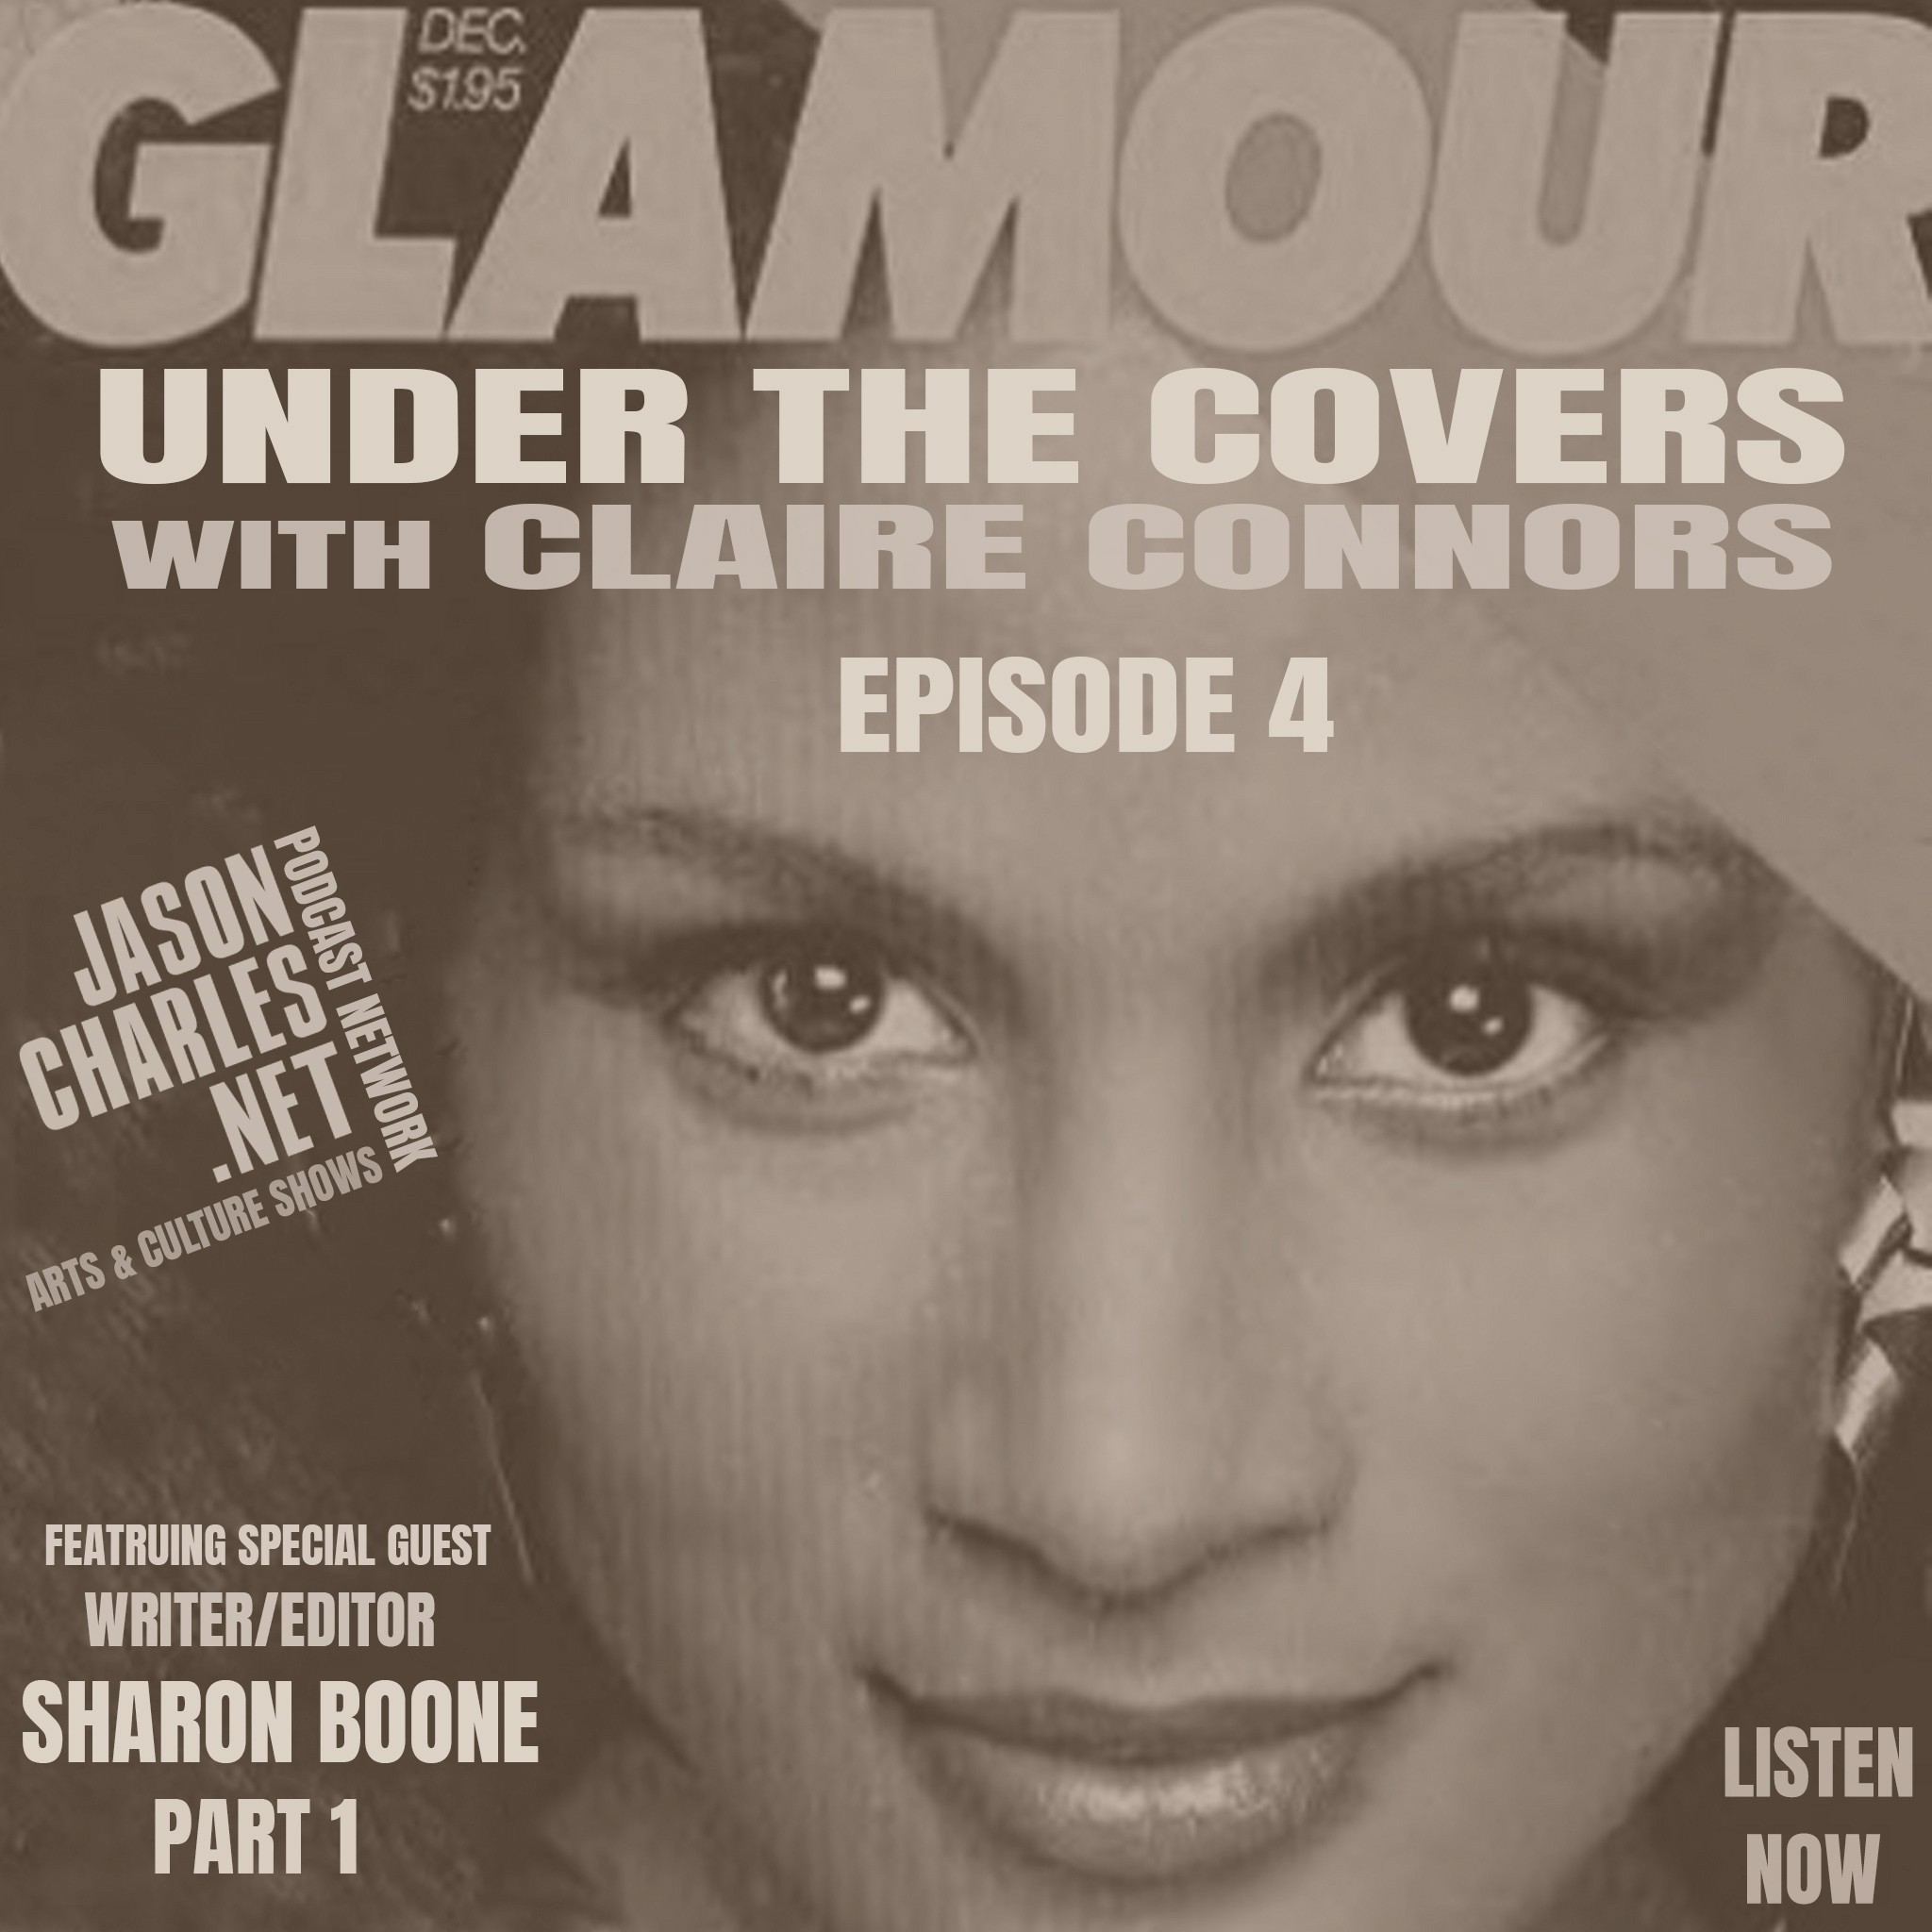 UNDER THE COVERS with Claire Connors Episode 4 Guest Sharon Boone Part 1